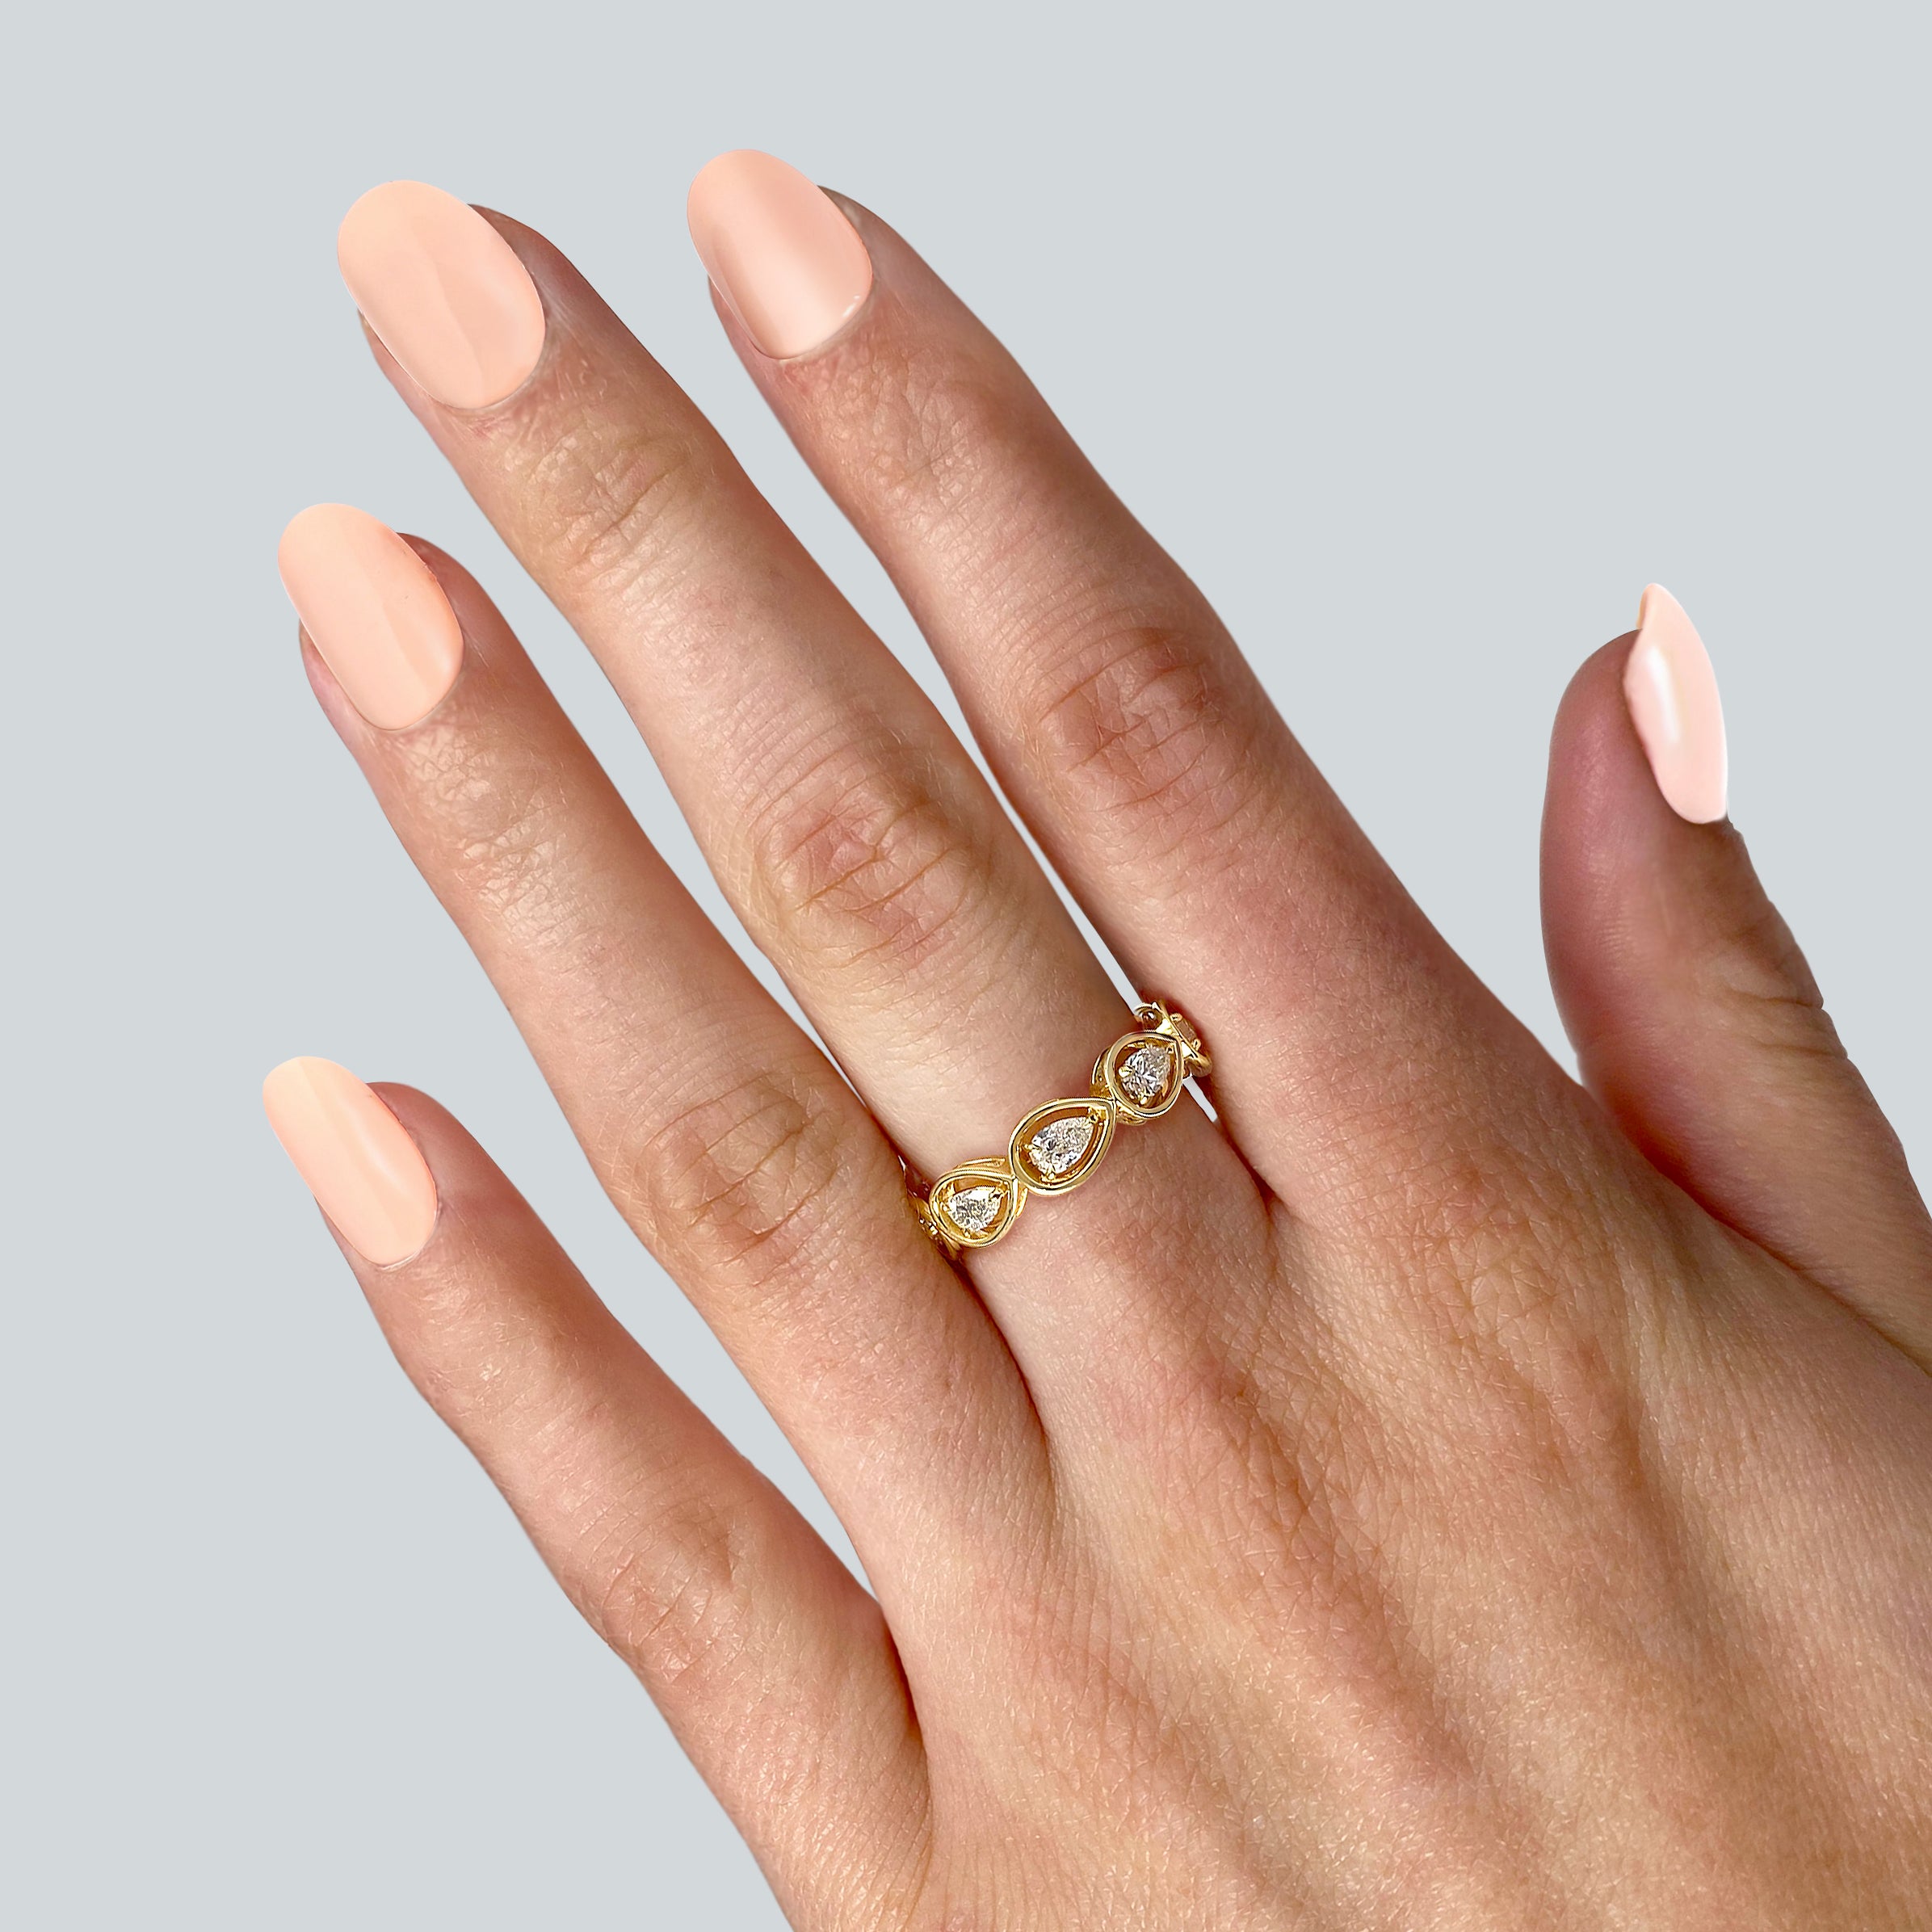 Shimansky - Women Wearing the Saturn Pear Diamond Eternity Ring 1.00ct crafted in 14K Yellow Gold